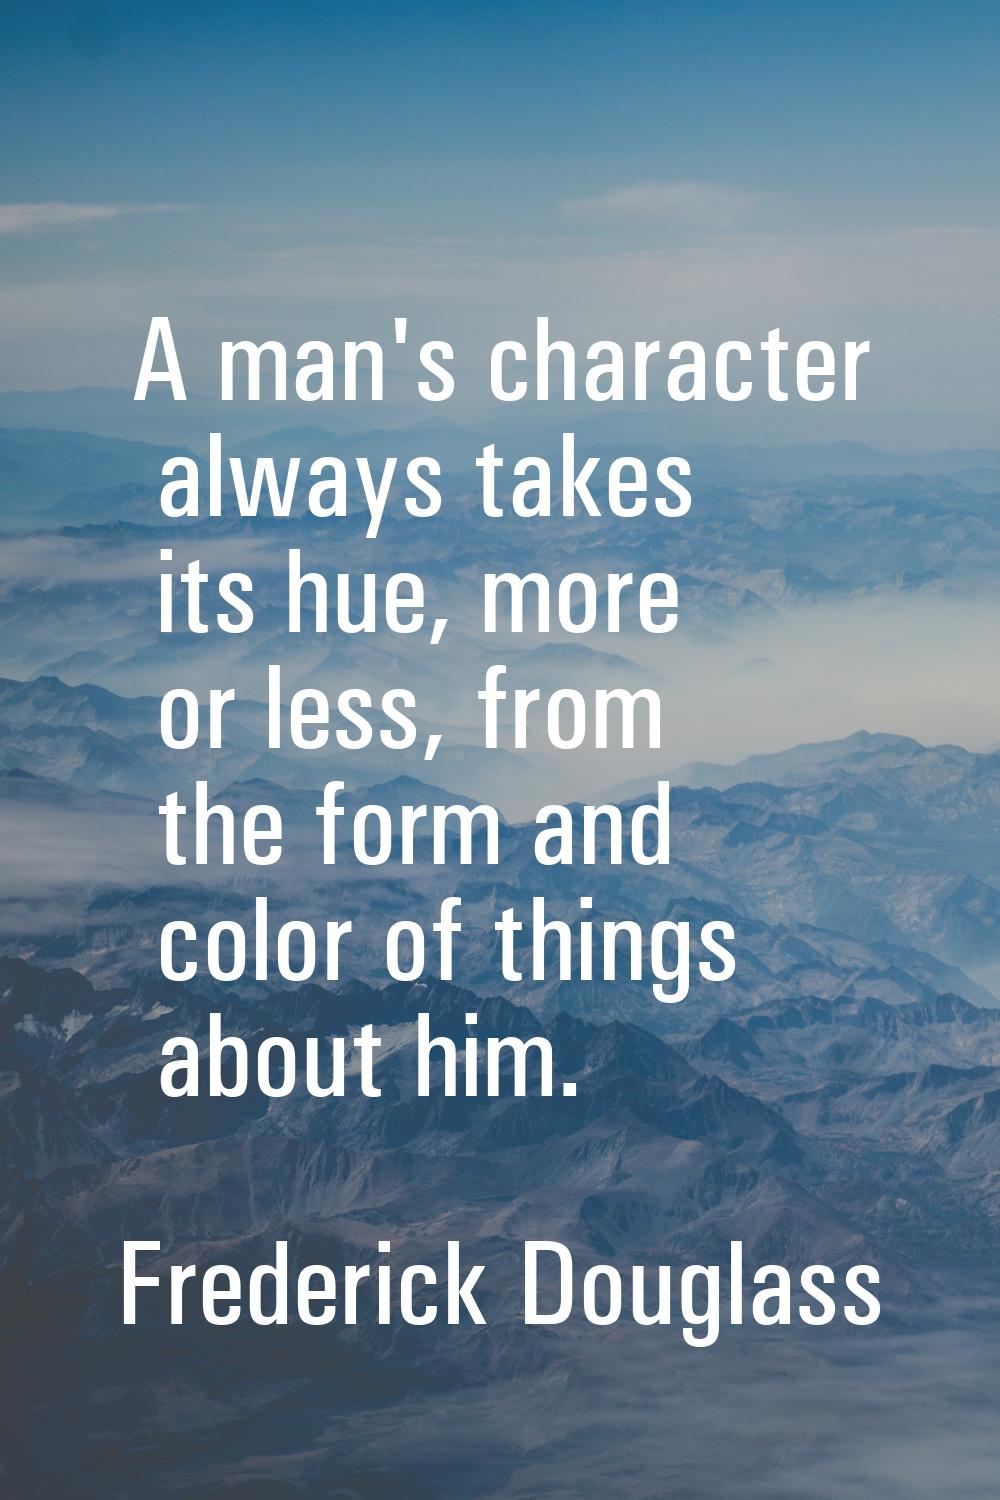 A man's character always takes its hue, more or less, from the form and color of things about him.